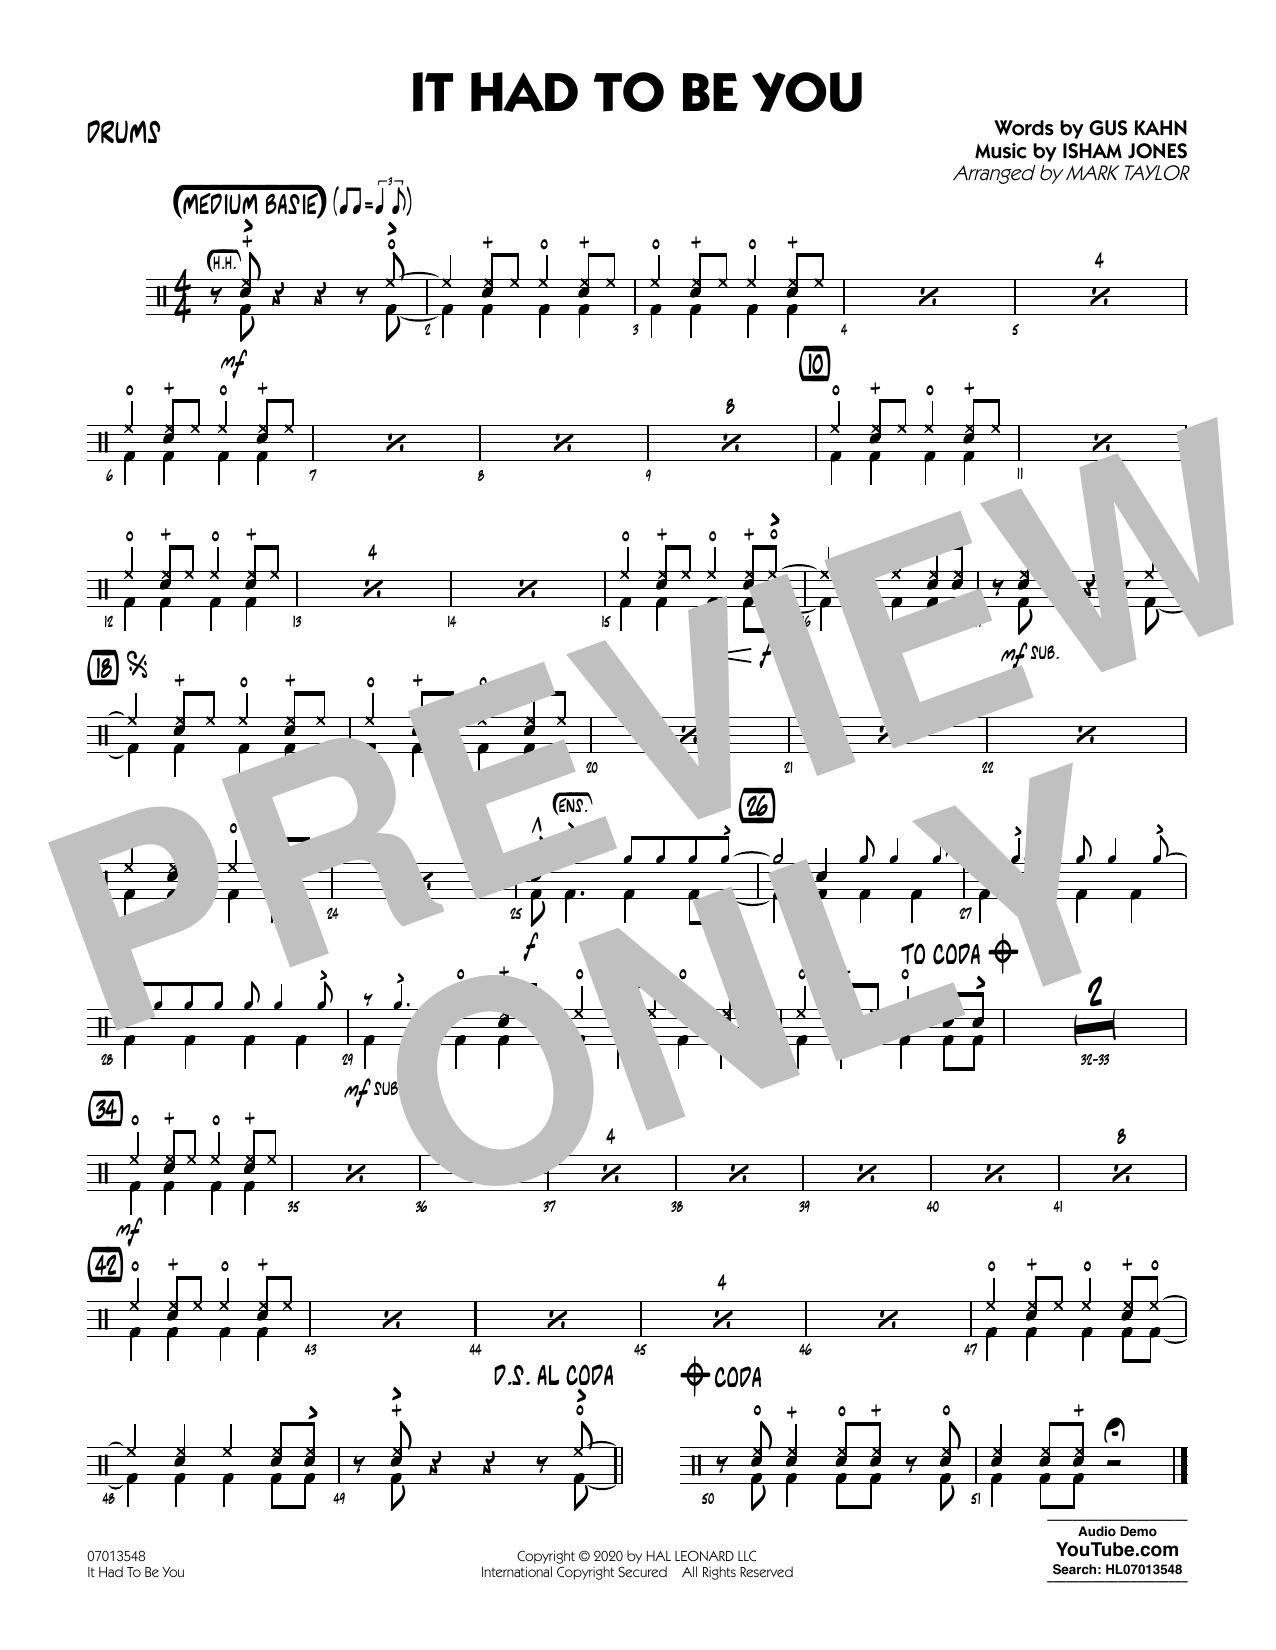 Download Isham Jones and Gus Kahn It Had to Be You (arr. Mark Taylor) - D Sheet Music